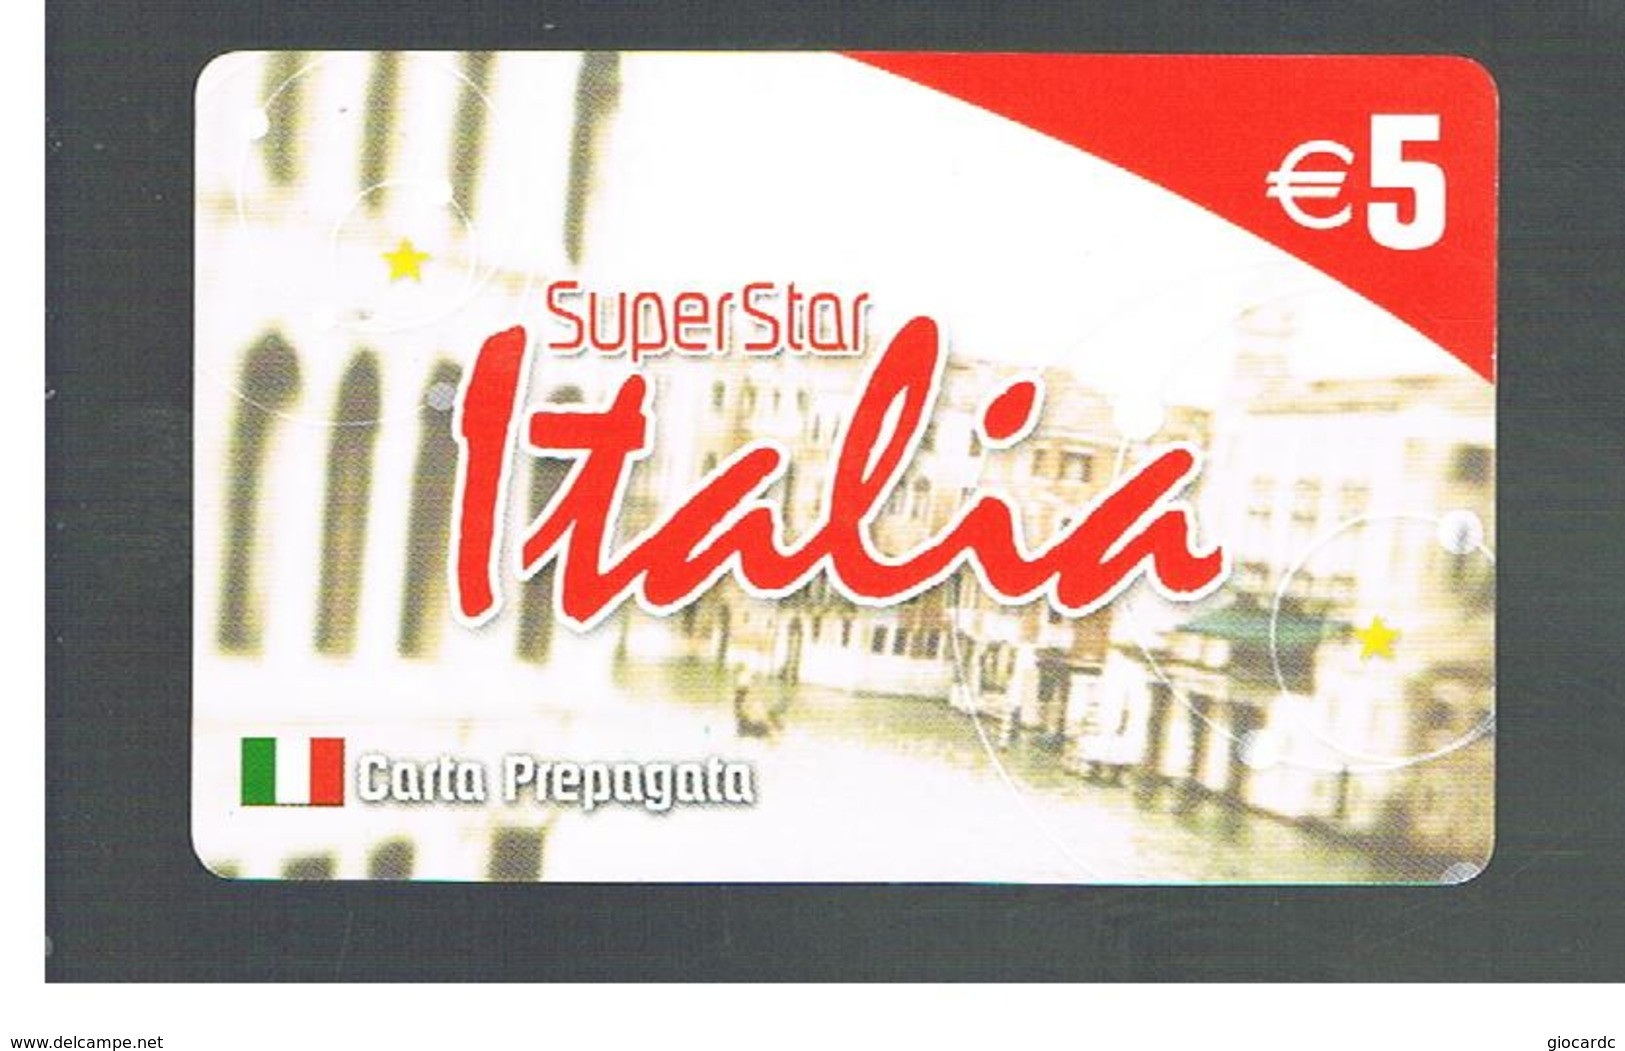 ITALIA (ITALY) - REMOTE -  T STAR - SUPERSTAR, BUILDING       - USED - RIF. 10971 - Cartes GSM Prépayées & Recharges